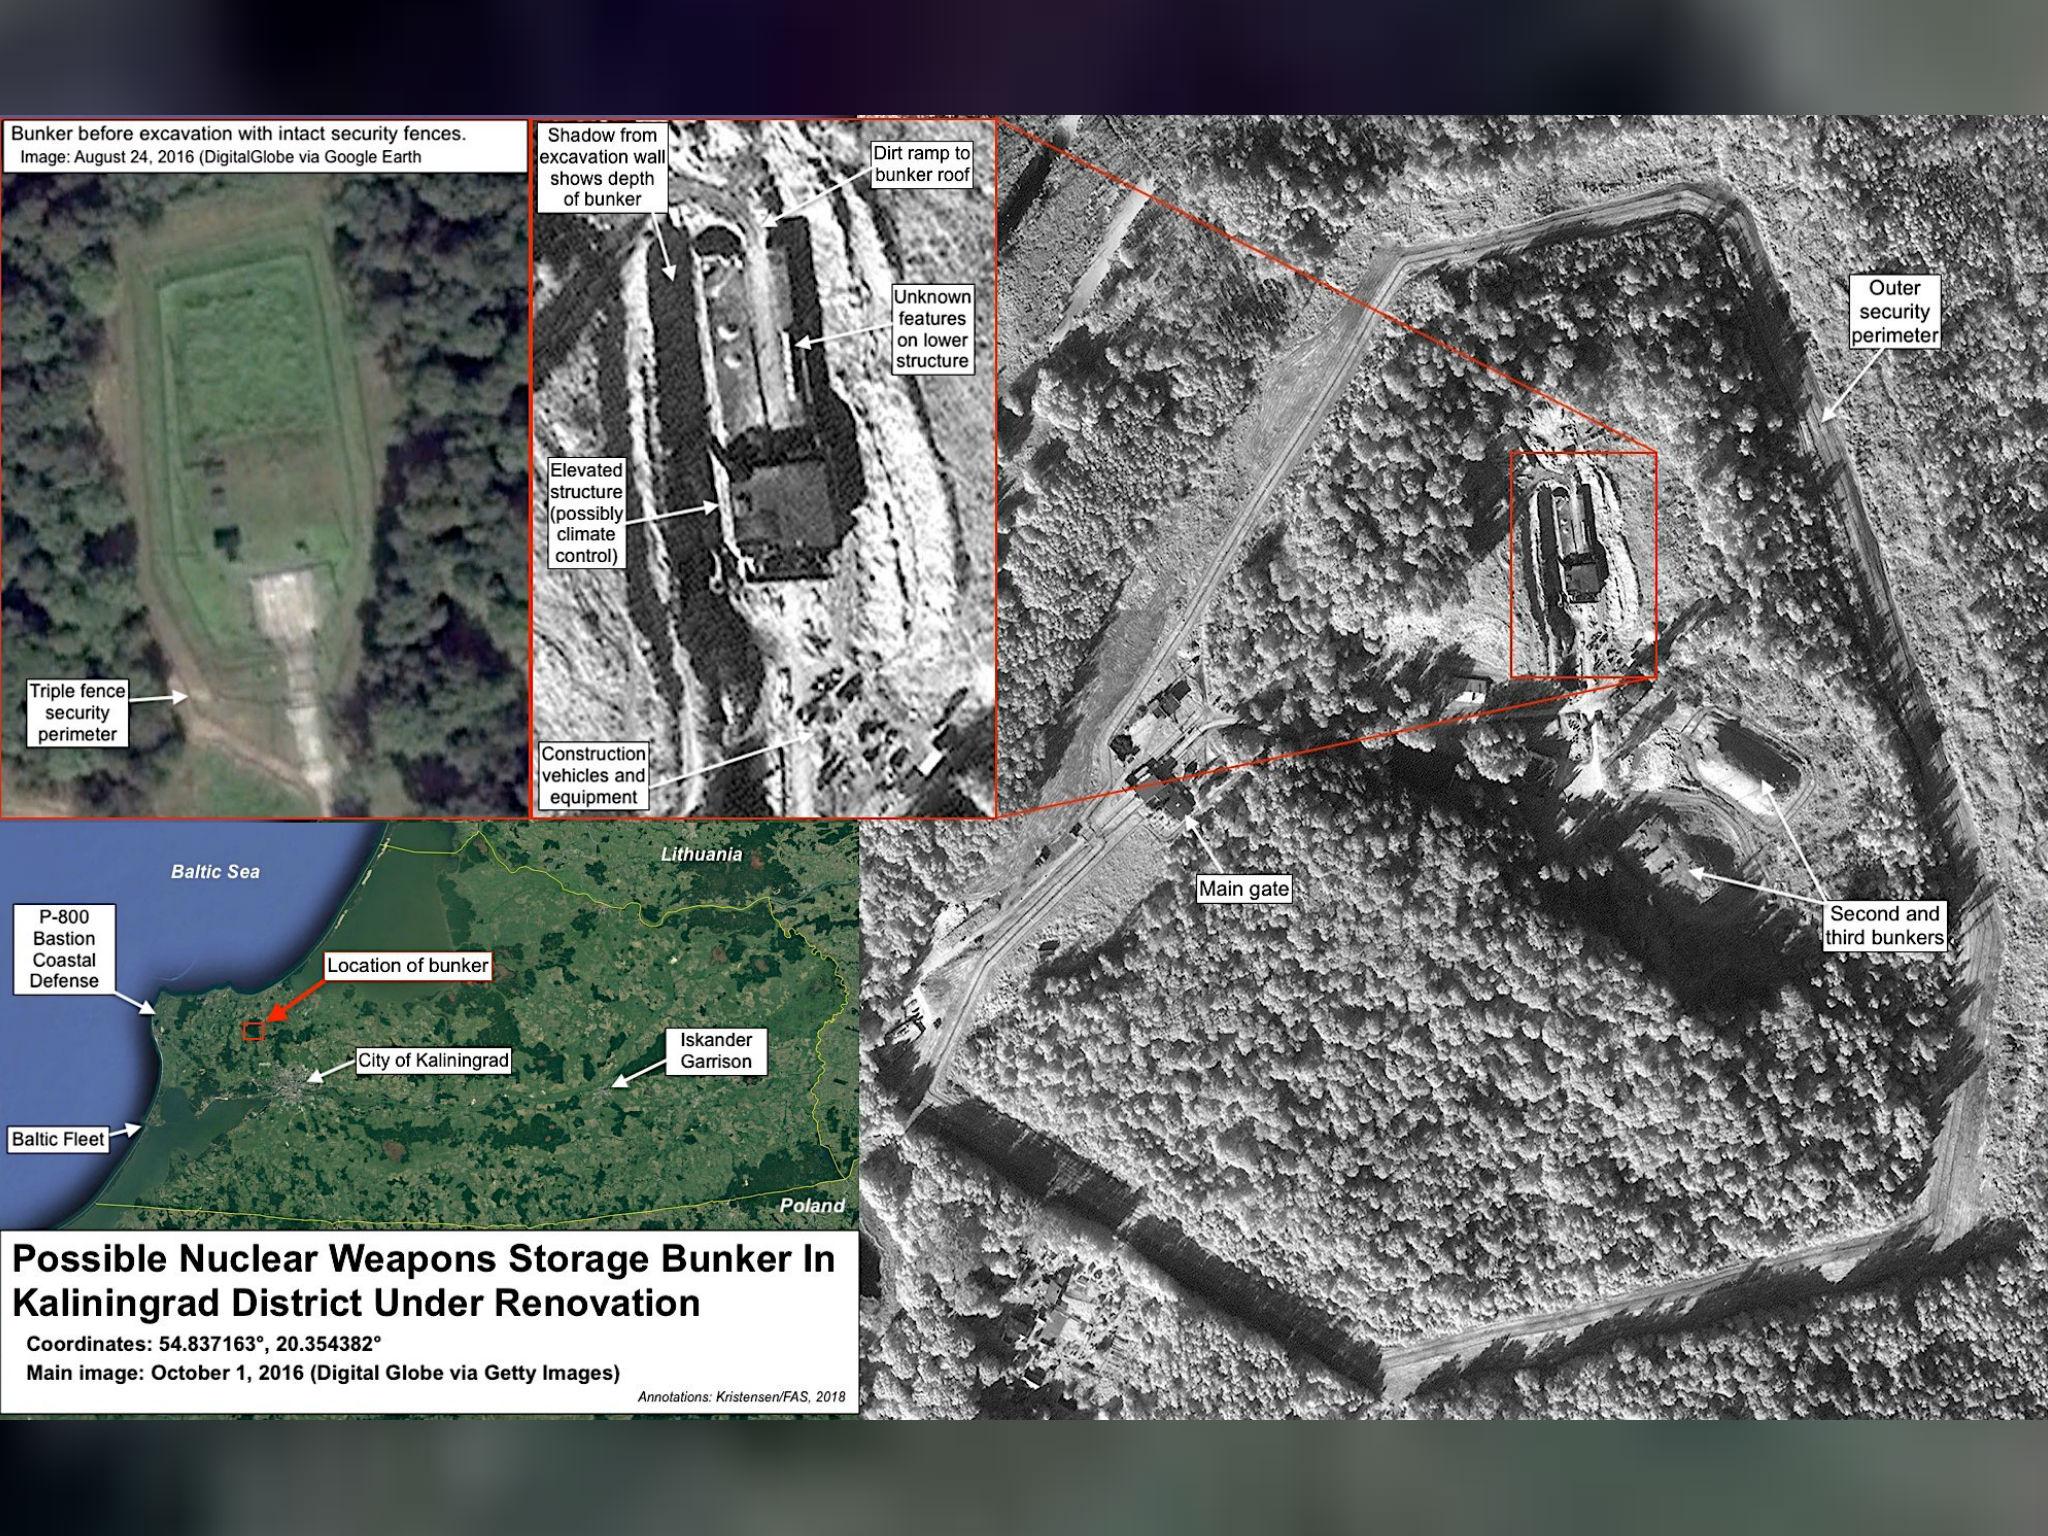 The satellite images show excavation and enforcement at a nuclear site in Russia